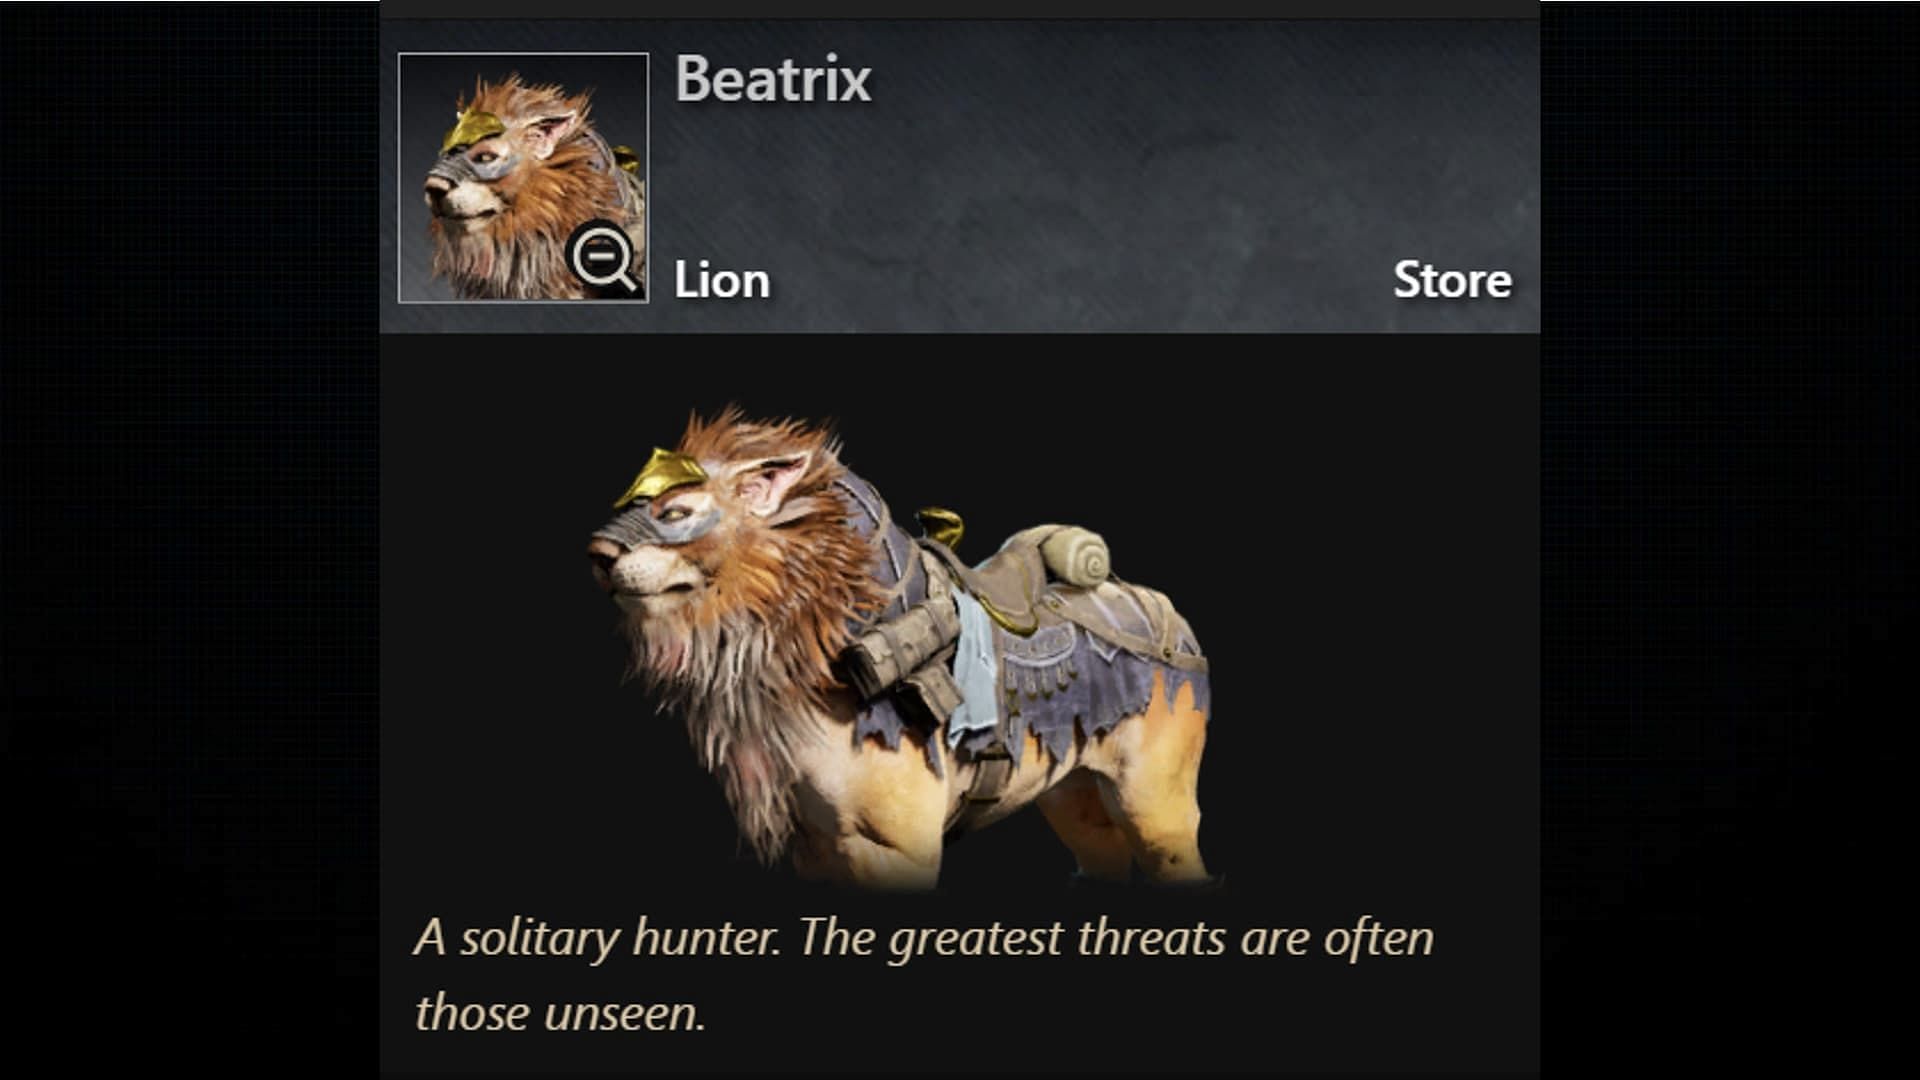 Beatrix is a lion mount in the game (Image via Amazon Games)